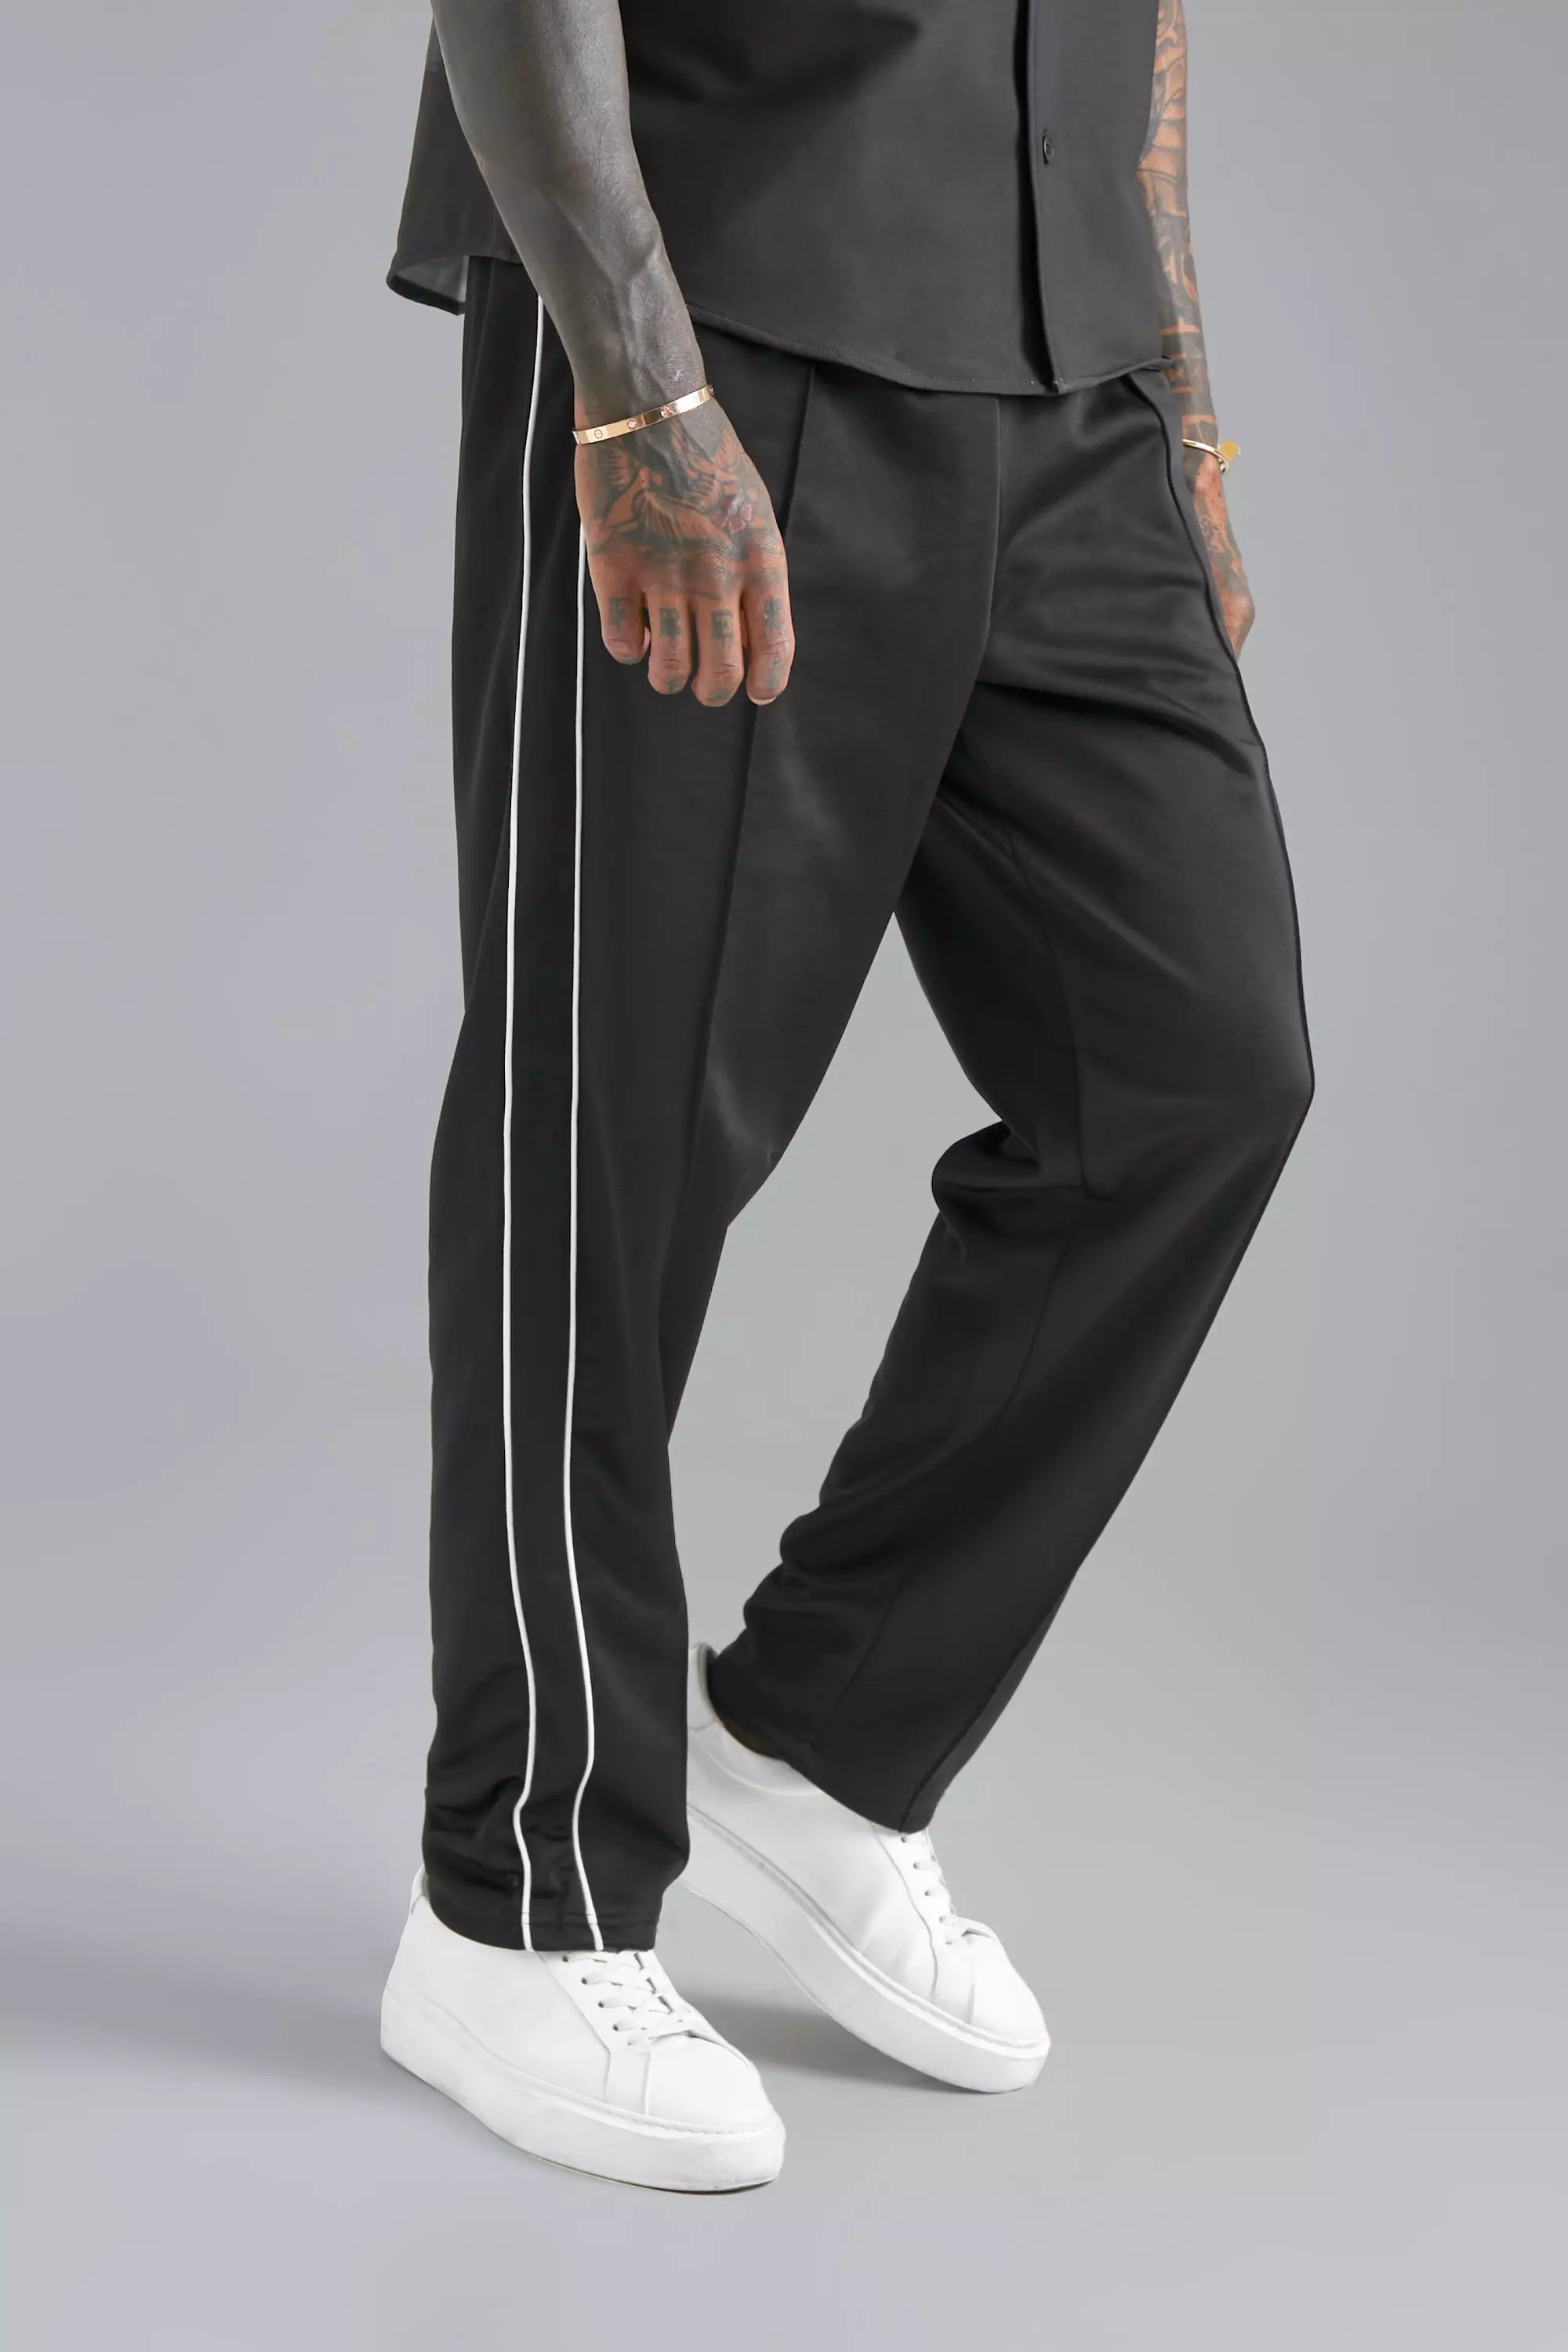 24 Wholesale Mens Tricot Jogger Pants With Rib Cuff Black And